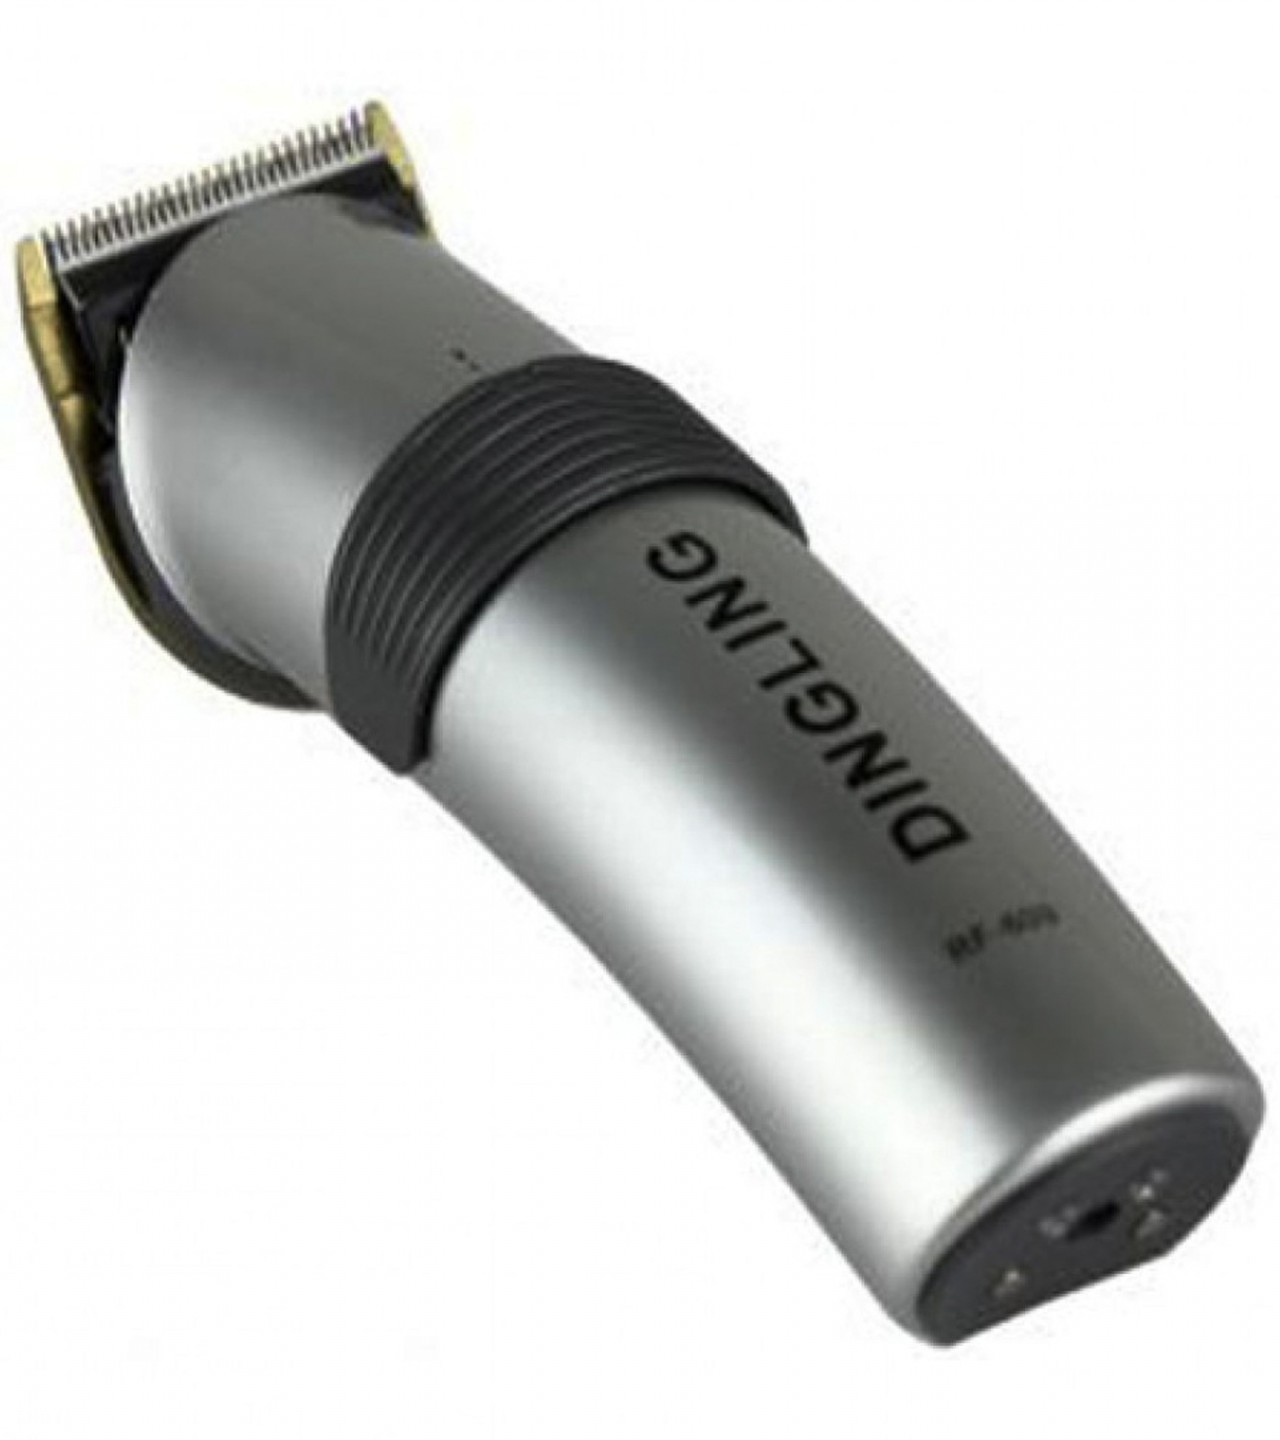 Dingling RF-699 Hair Trimmer And Shaver For Men - Silver